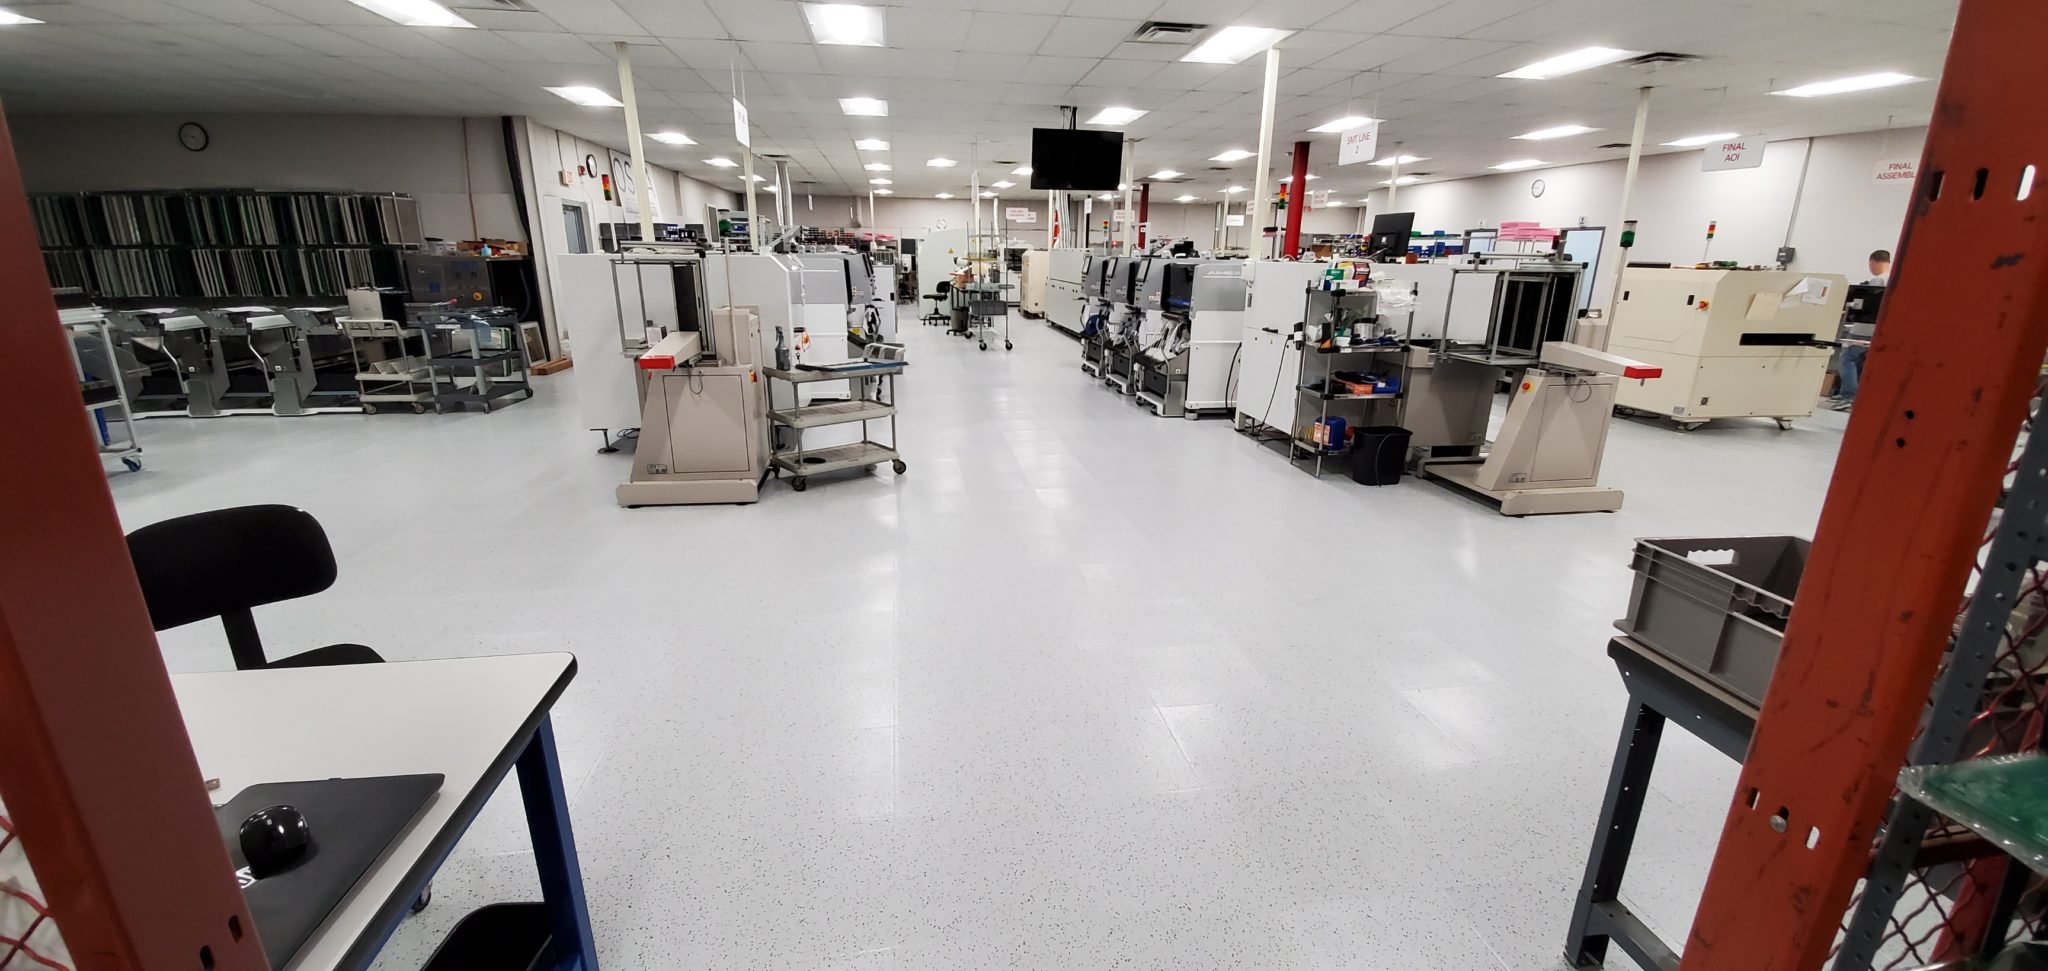 SelecTech FreeStyle ESD Plus tile flooring in OSDA electronics assembly facility